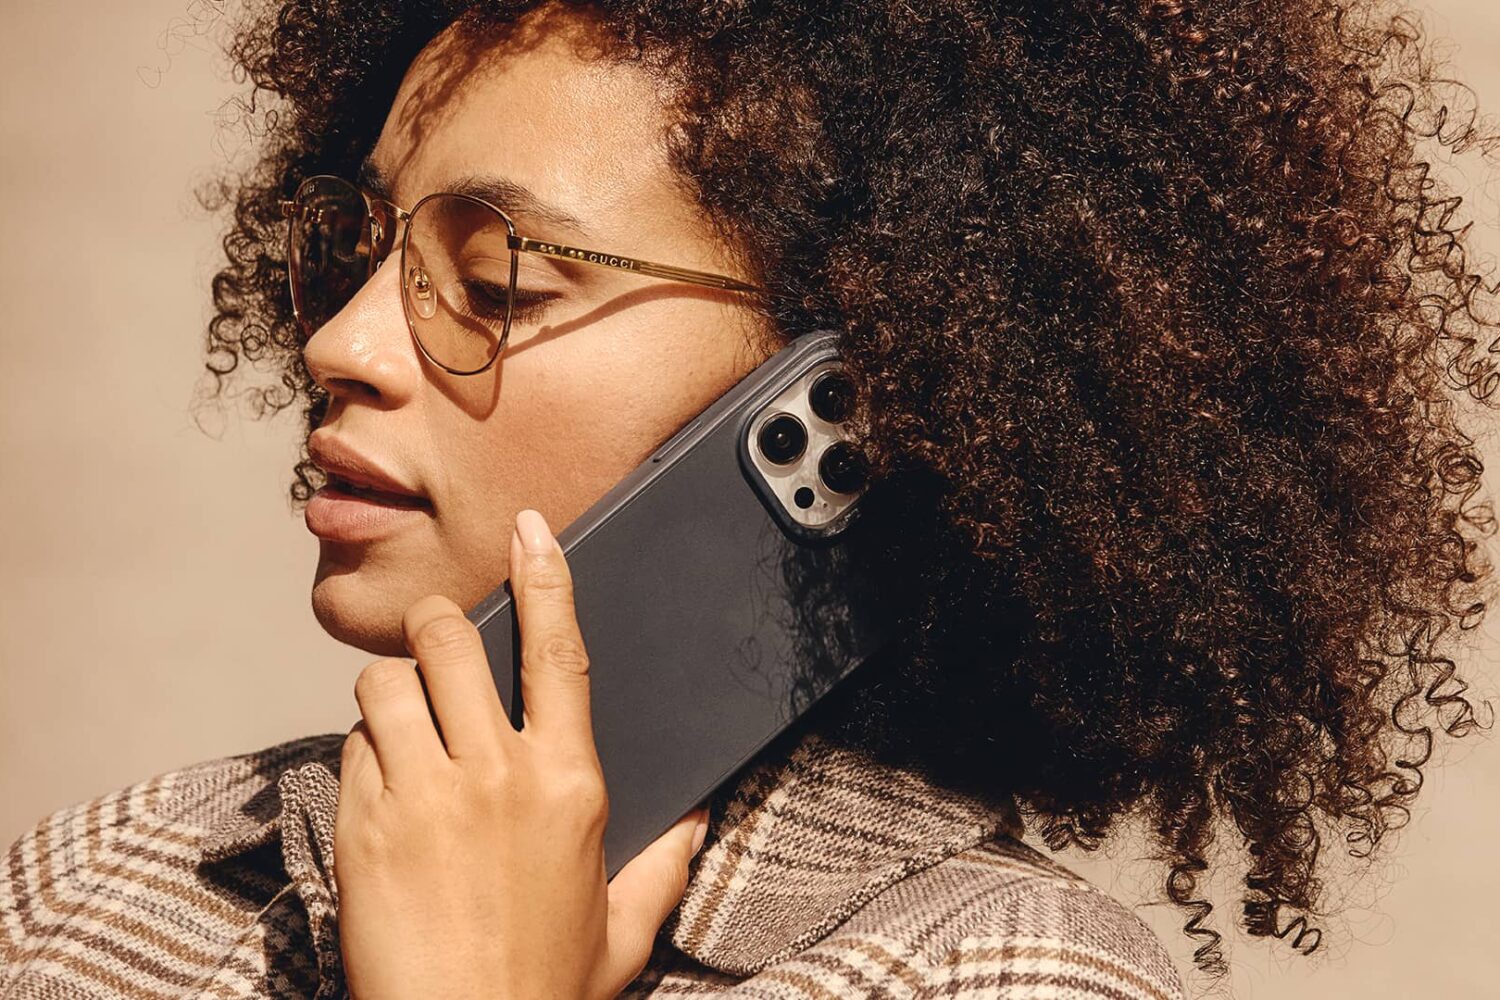 Young woman holding an iPhone 15 Pro in Mujjo's protective case against her ear